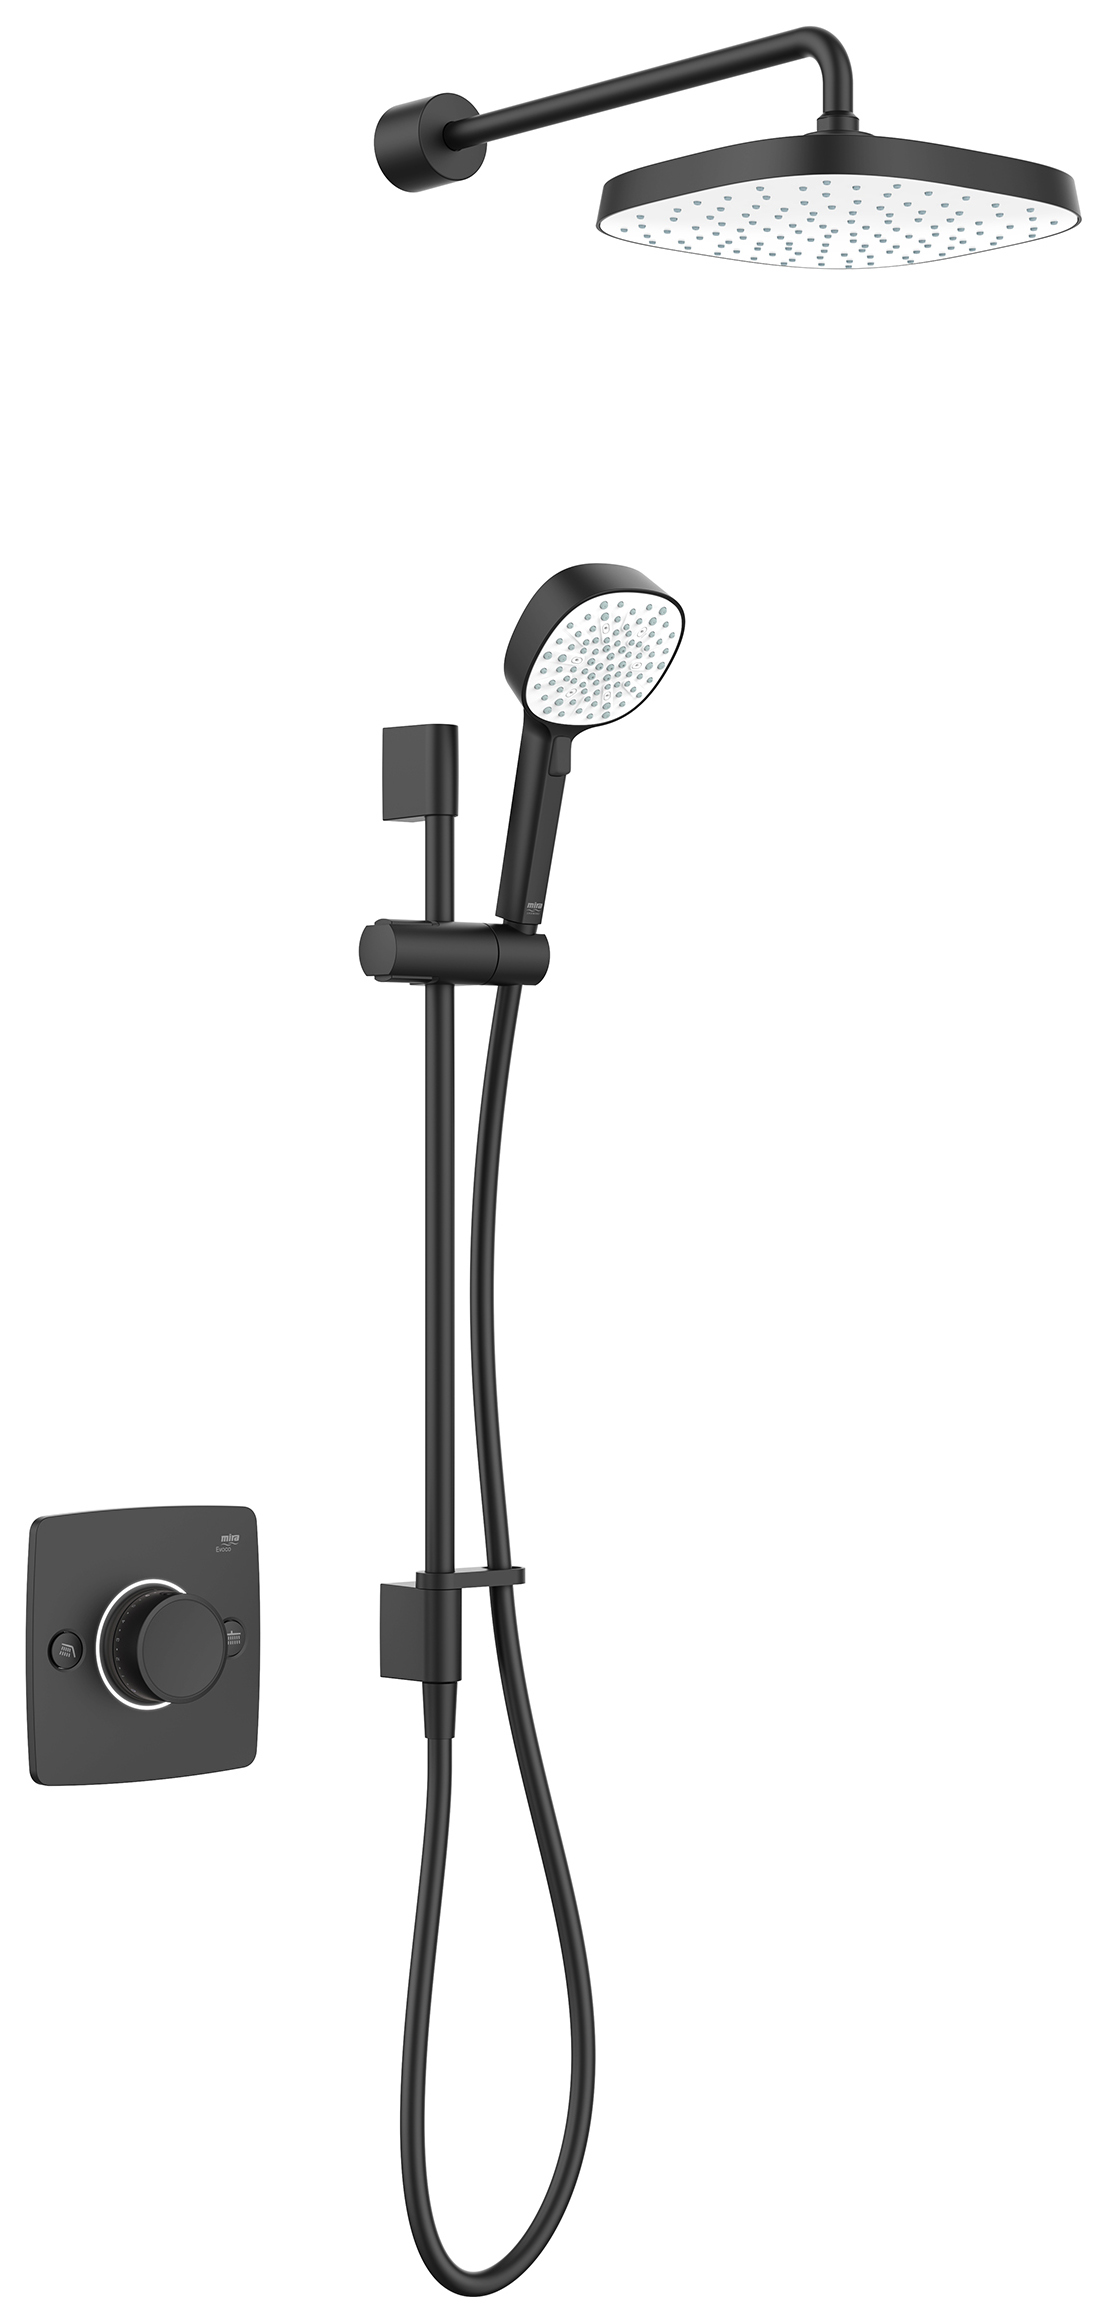 Image of Mira Evoco Dual Outlet Thermostatic Mixer Shower with HydroGlo Technology - Matt Black